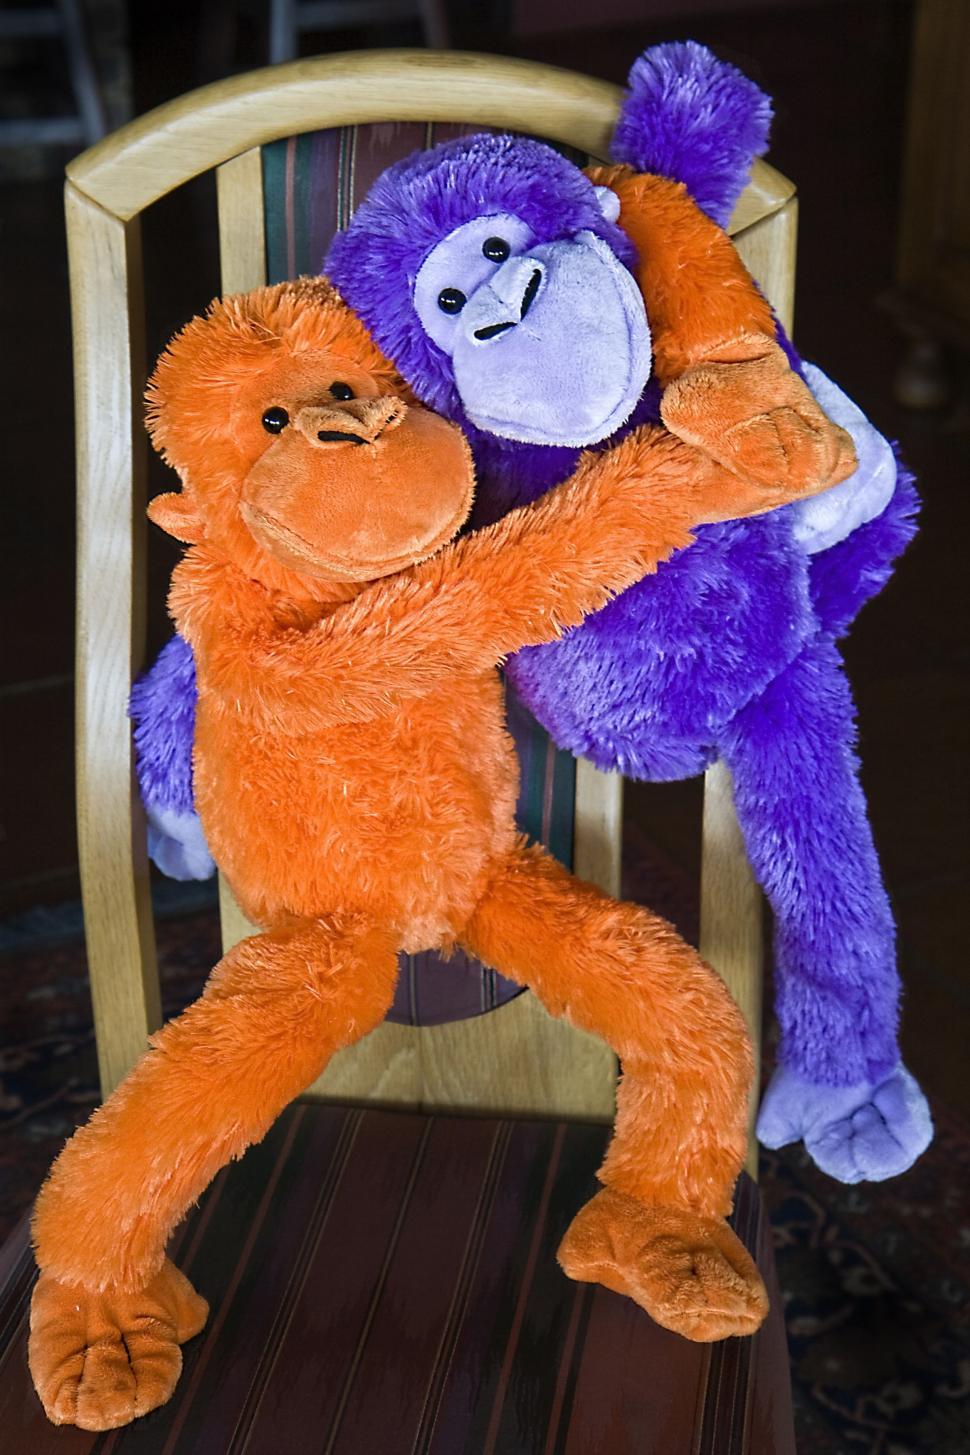 Free Image of monkey fluffy toy ape cuddly soft furry stuffed happy cute play hug cheerful smiling fun together embracing companion togetherness embrace friends friendship pal chum mate hugging buddies 